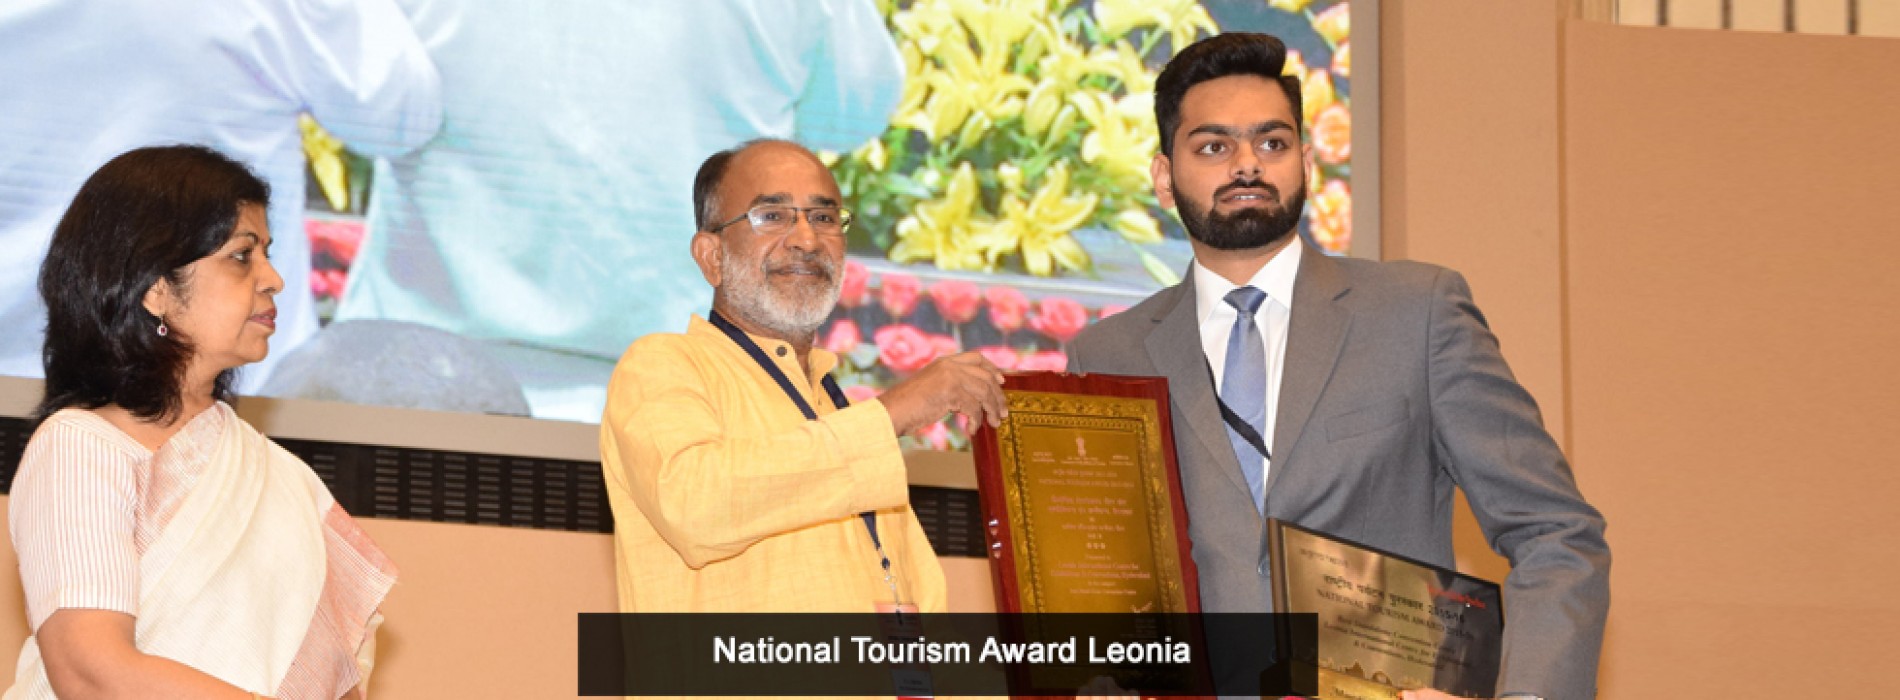 LICEC wins National Tourism Award for fourth time